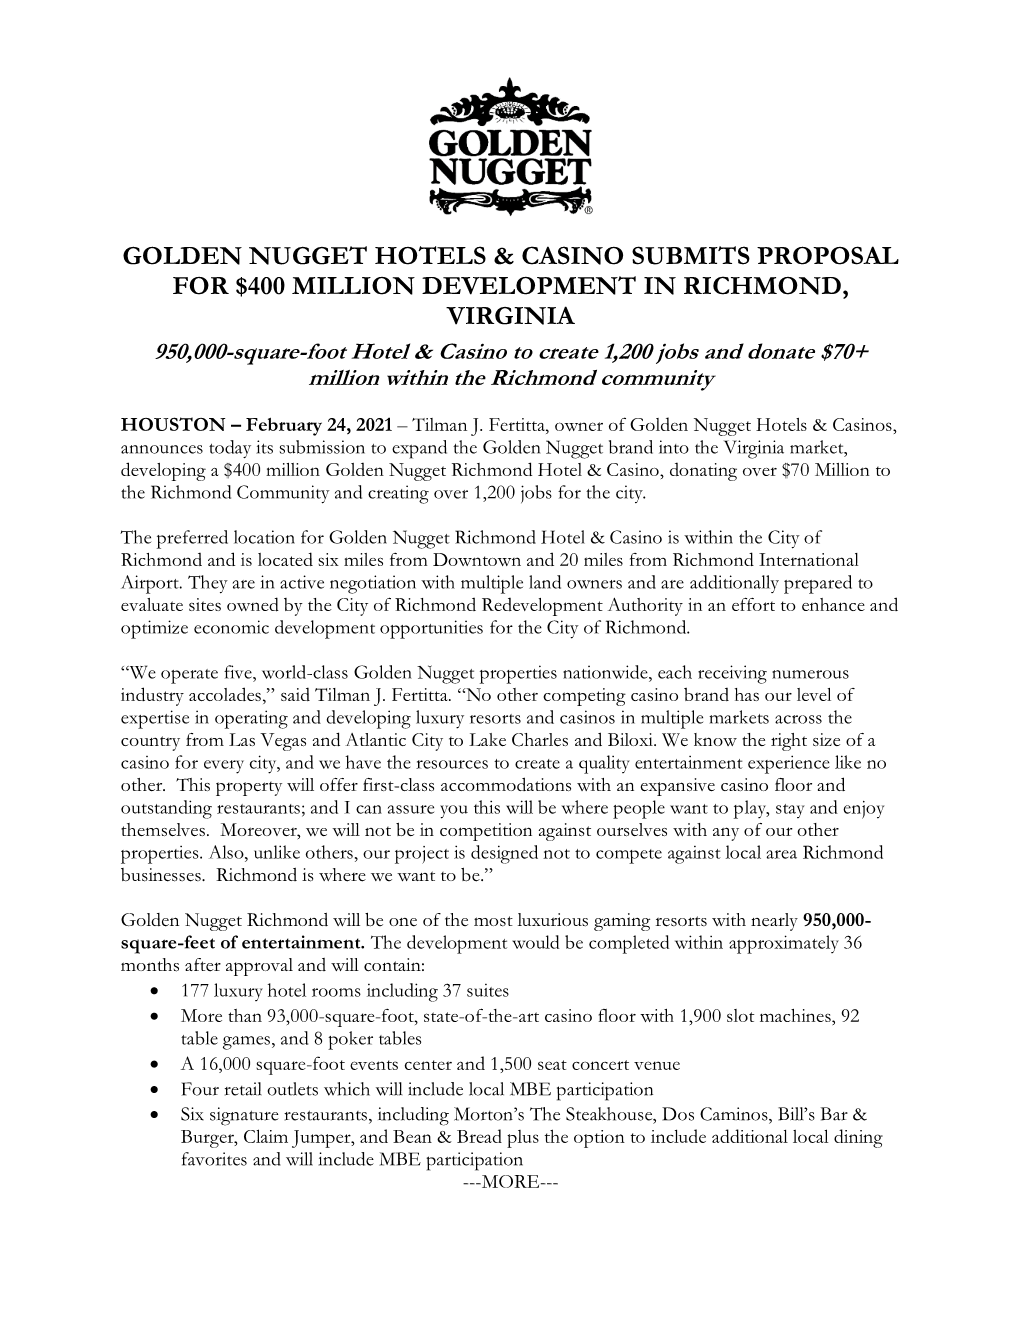 Golden Nugget Hotels & Casino Submits Proposal for $400 Million